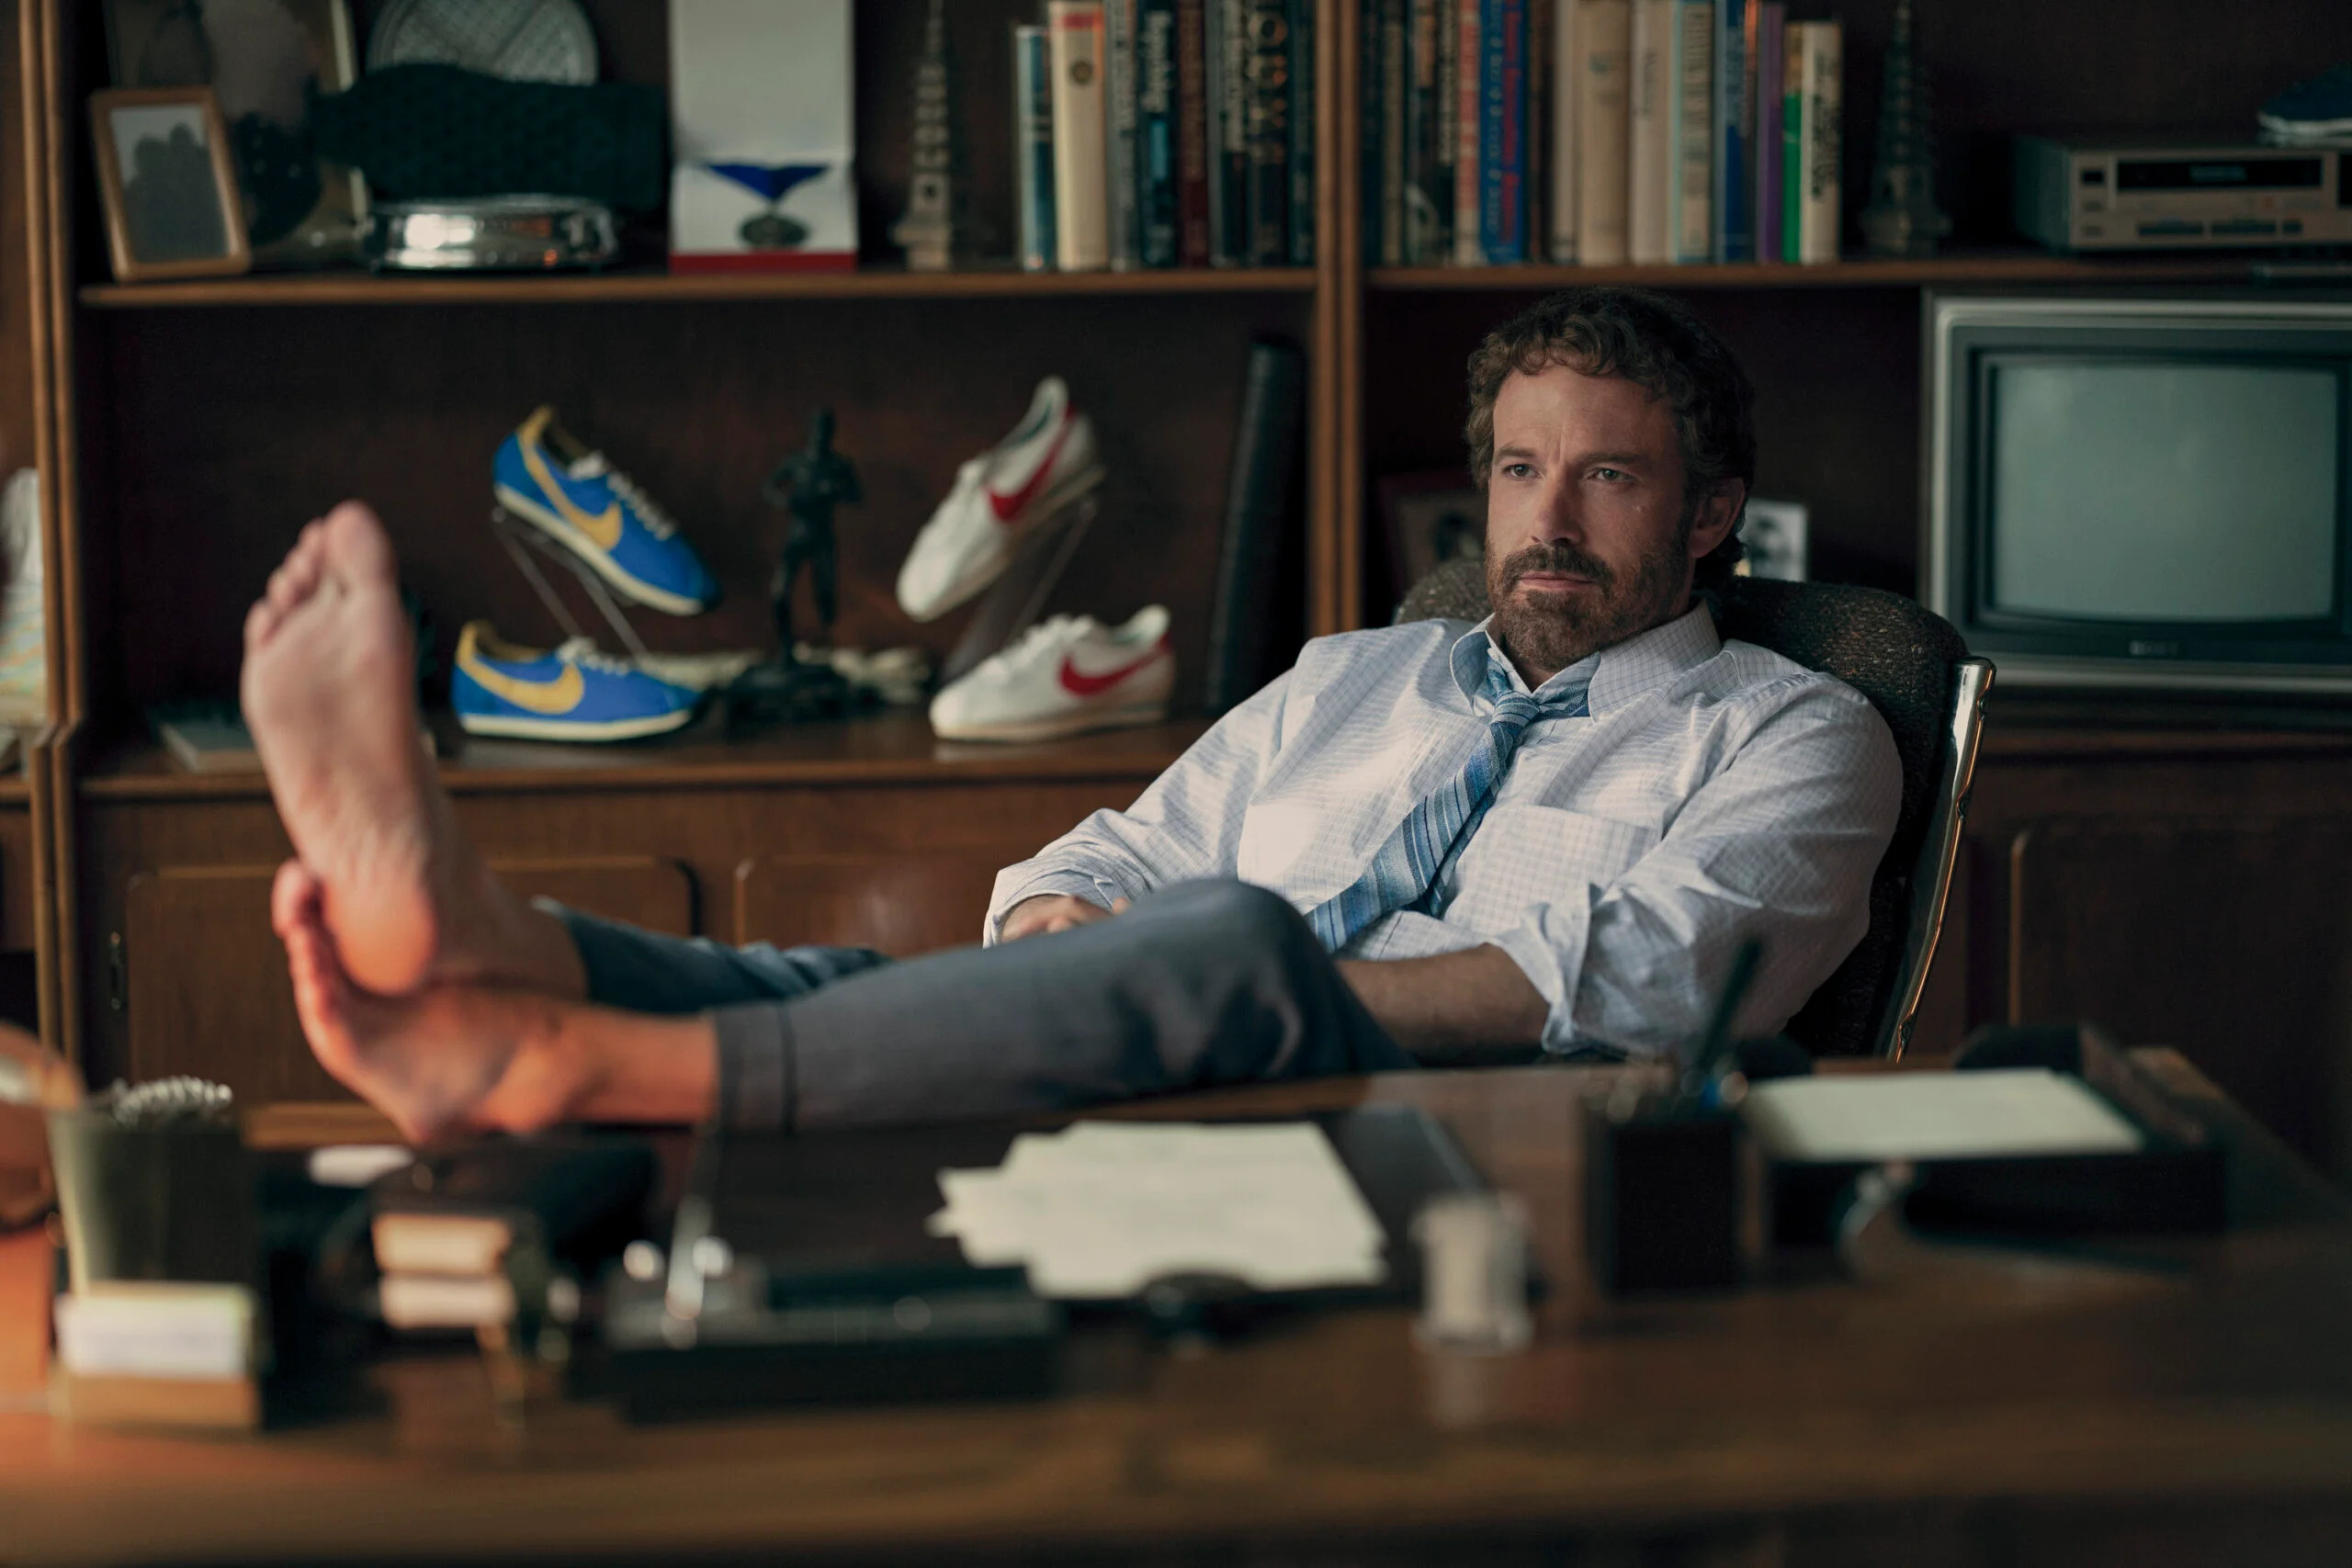 Ben Affleck, in a shirt and tie, sits with his bare feet propped up on a desk